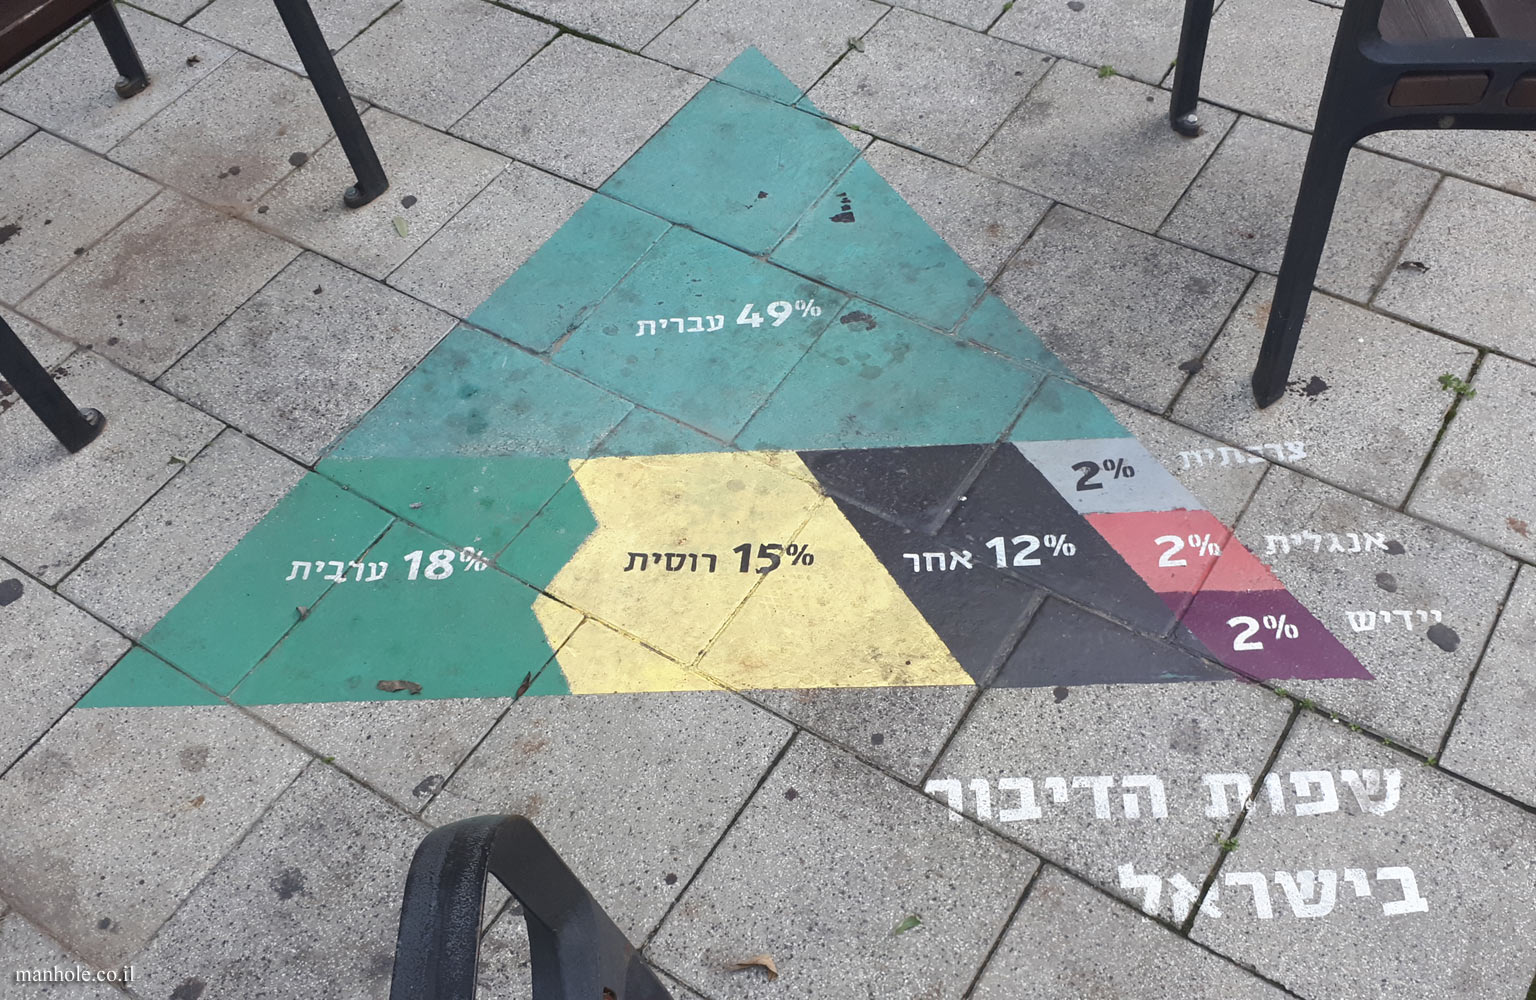 Ramat Gan - Information on the spoken languages in Israel in the Diamond Exchange area